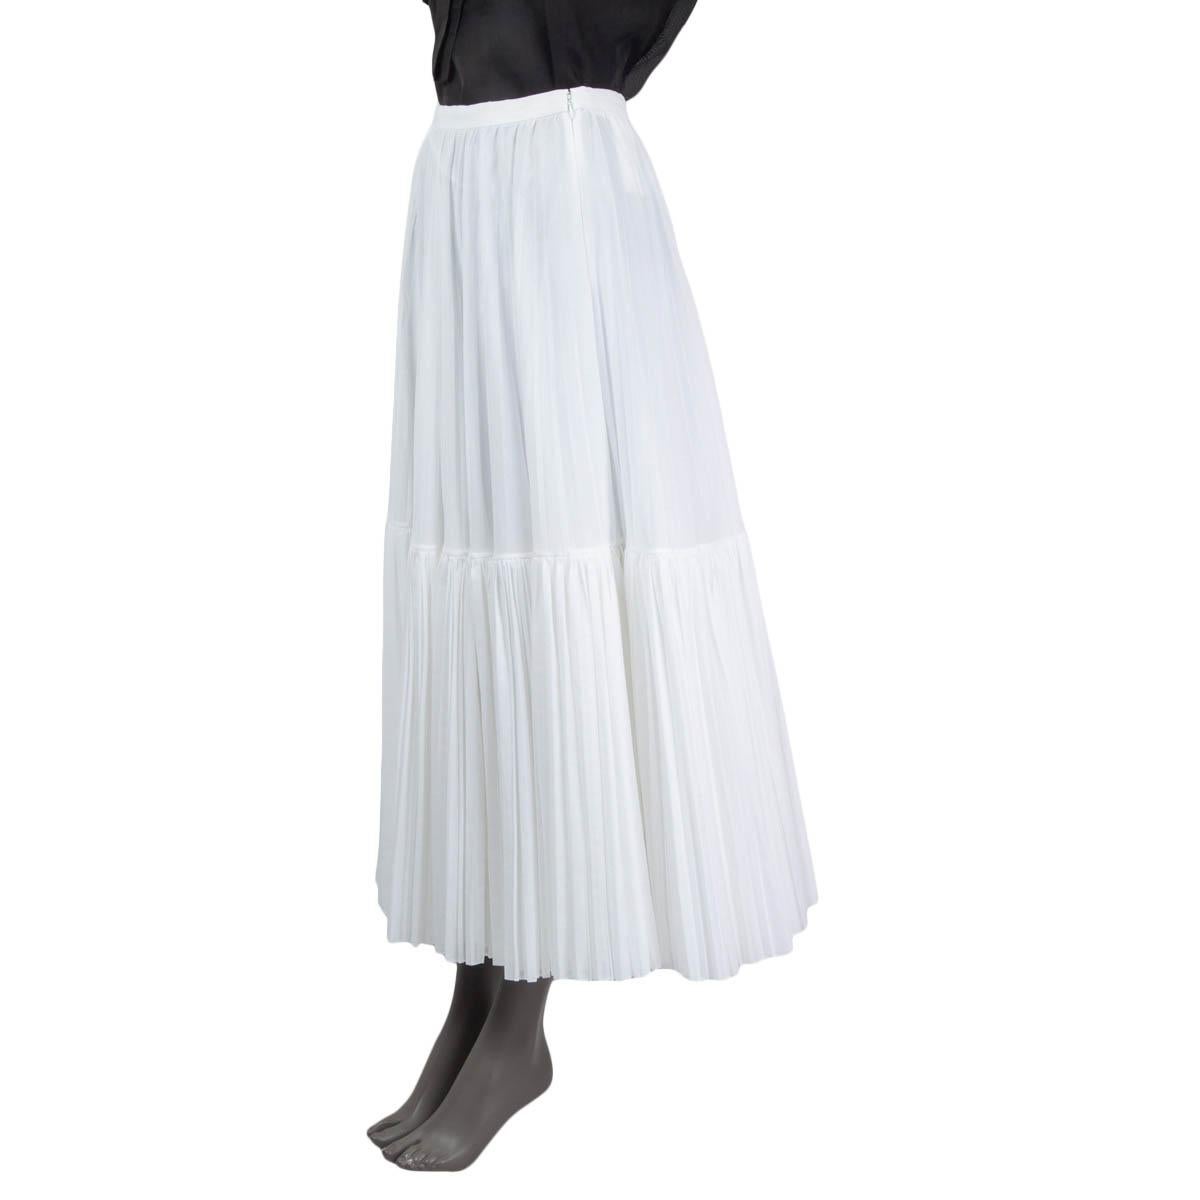 100% authentic Christian Dior Resort 2019 pleated maxi skirt in white cotton (100%). Opens with a zipper and a hook at the side. Lined in white cotton (100%). Has some faint and barely visible stains at the waistband, otherwise in excellent